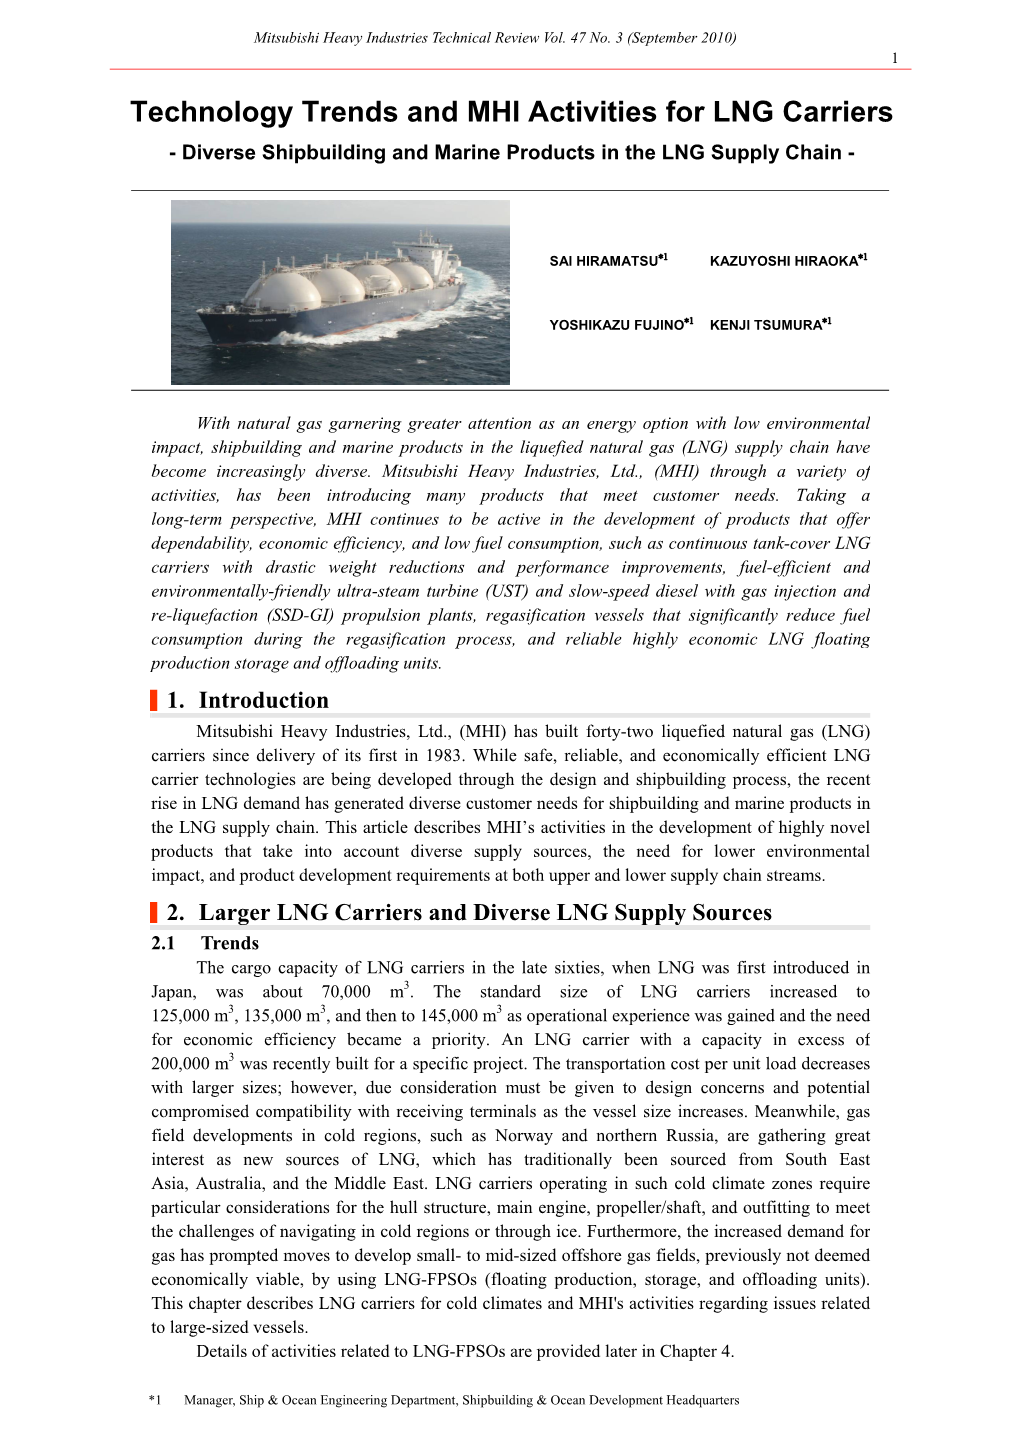 Key Technologies of LNG Carrier and Recent MHI Activity- Variation Of